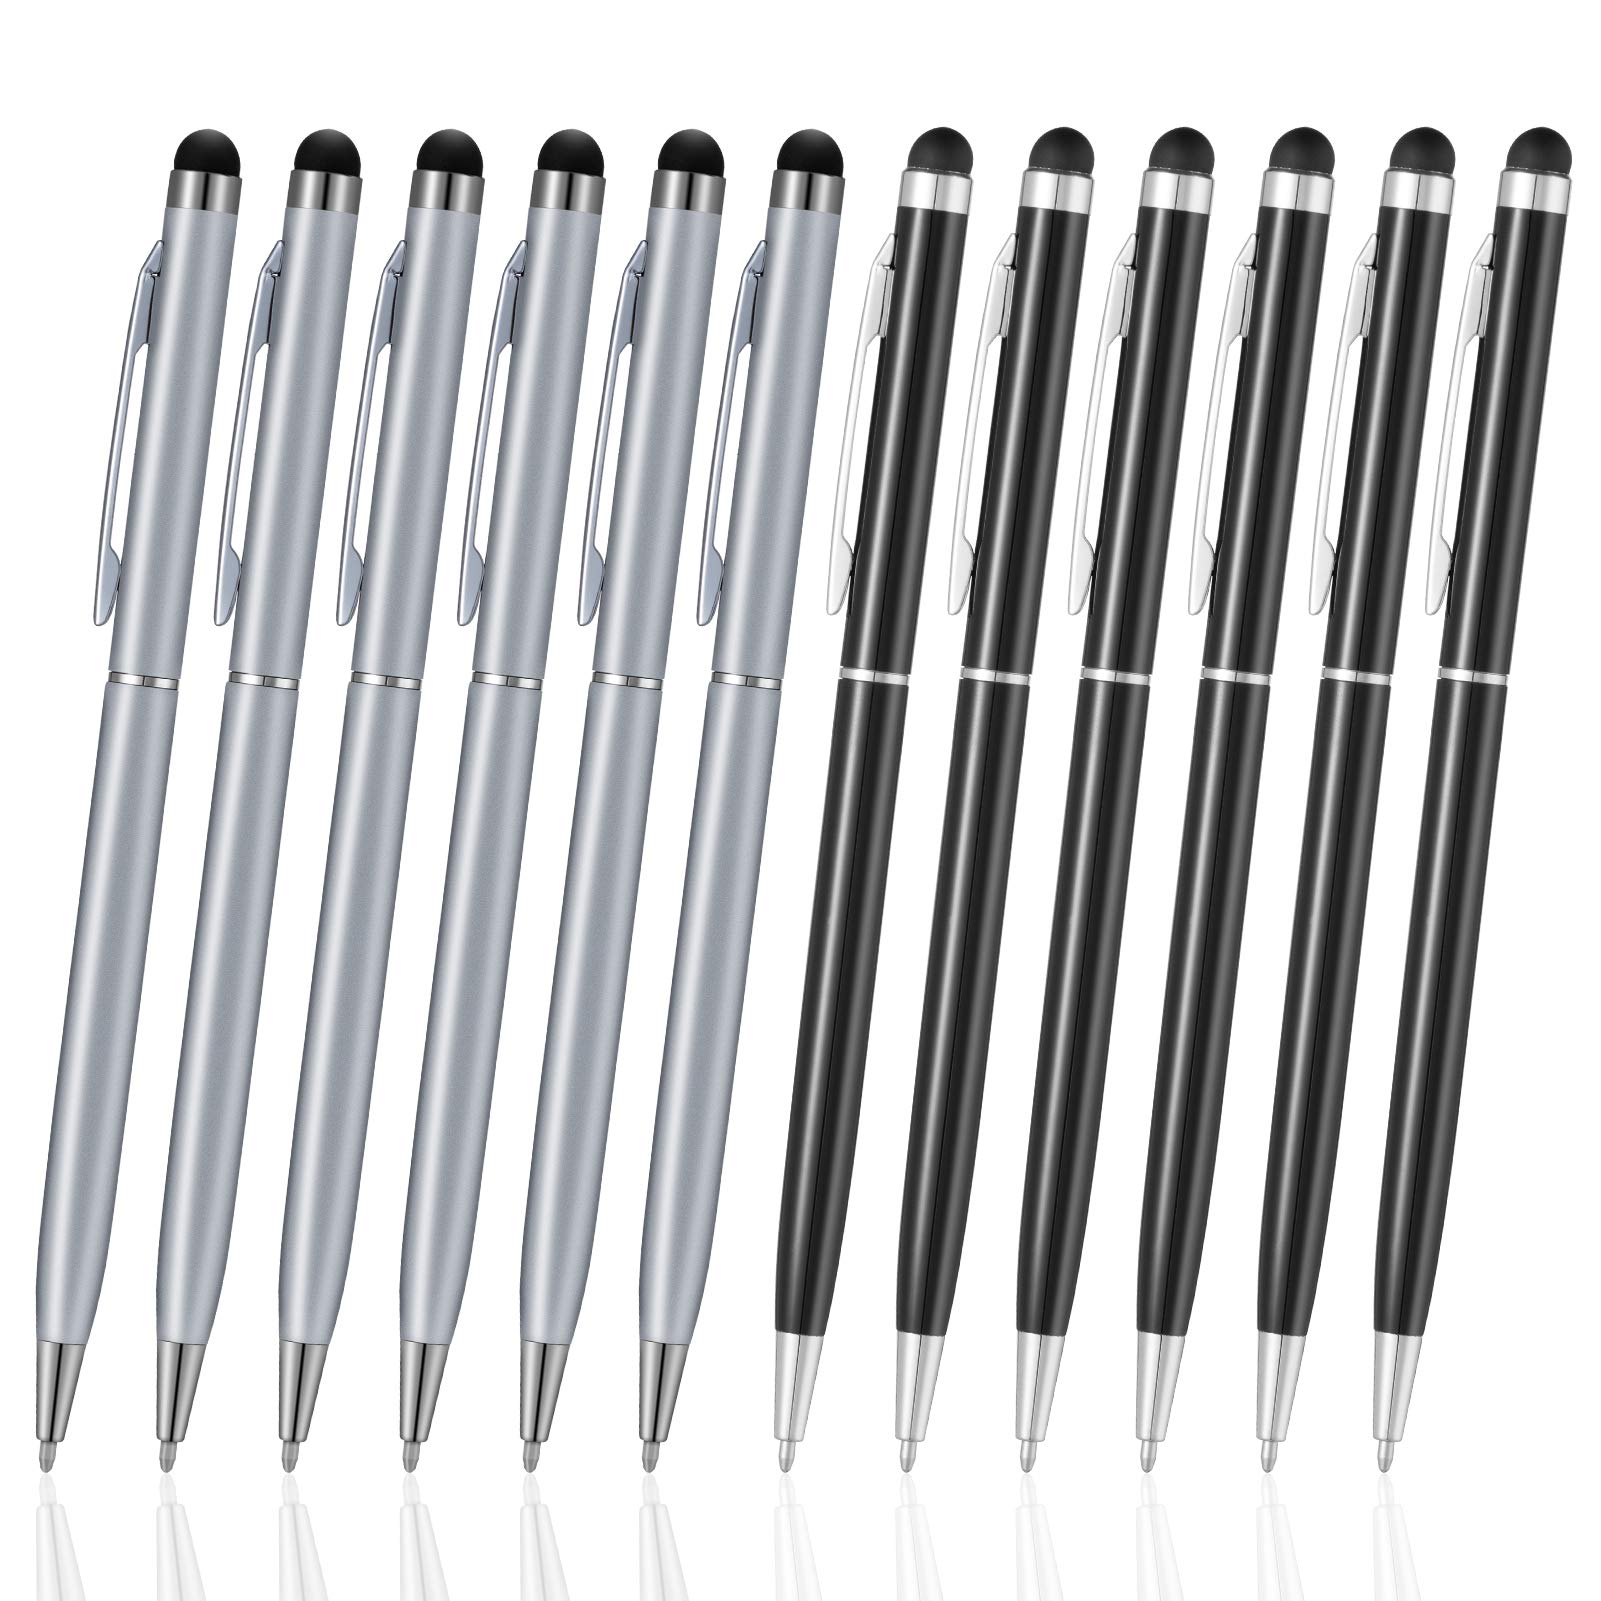 ORIbox Stylus Pen Ballpoint Pen,12pcs Universal 2 in 1 Capacitive Stylus Ballpoint Pen for iPad, iPhone, Samsung, HTC, Fire tablet, Tablet, All Capacitive Touch Screen Device(6 Black,6 Sliver)